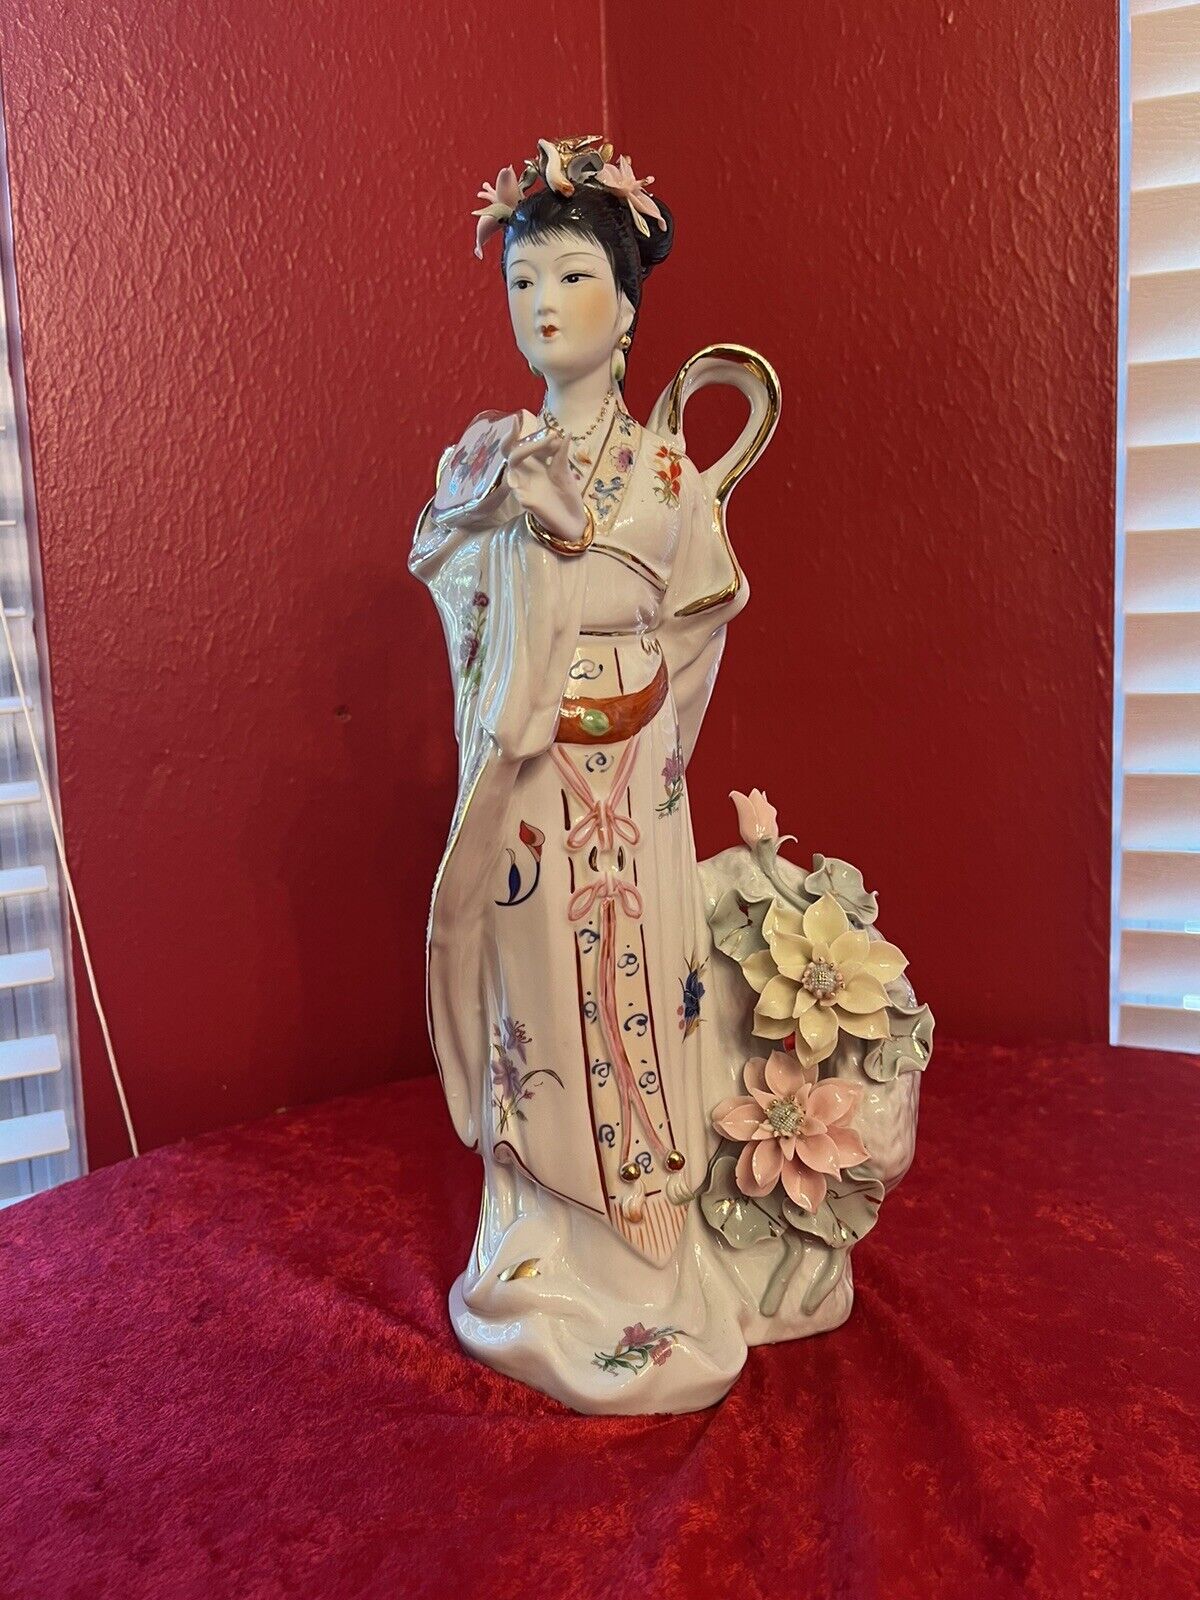 VINTAGE TRADITITIONAL ASIAN GEIHSA LADY STATUE